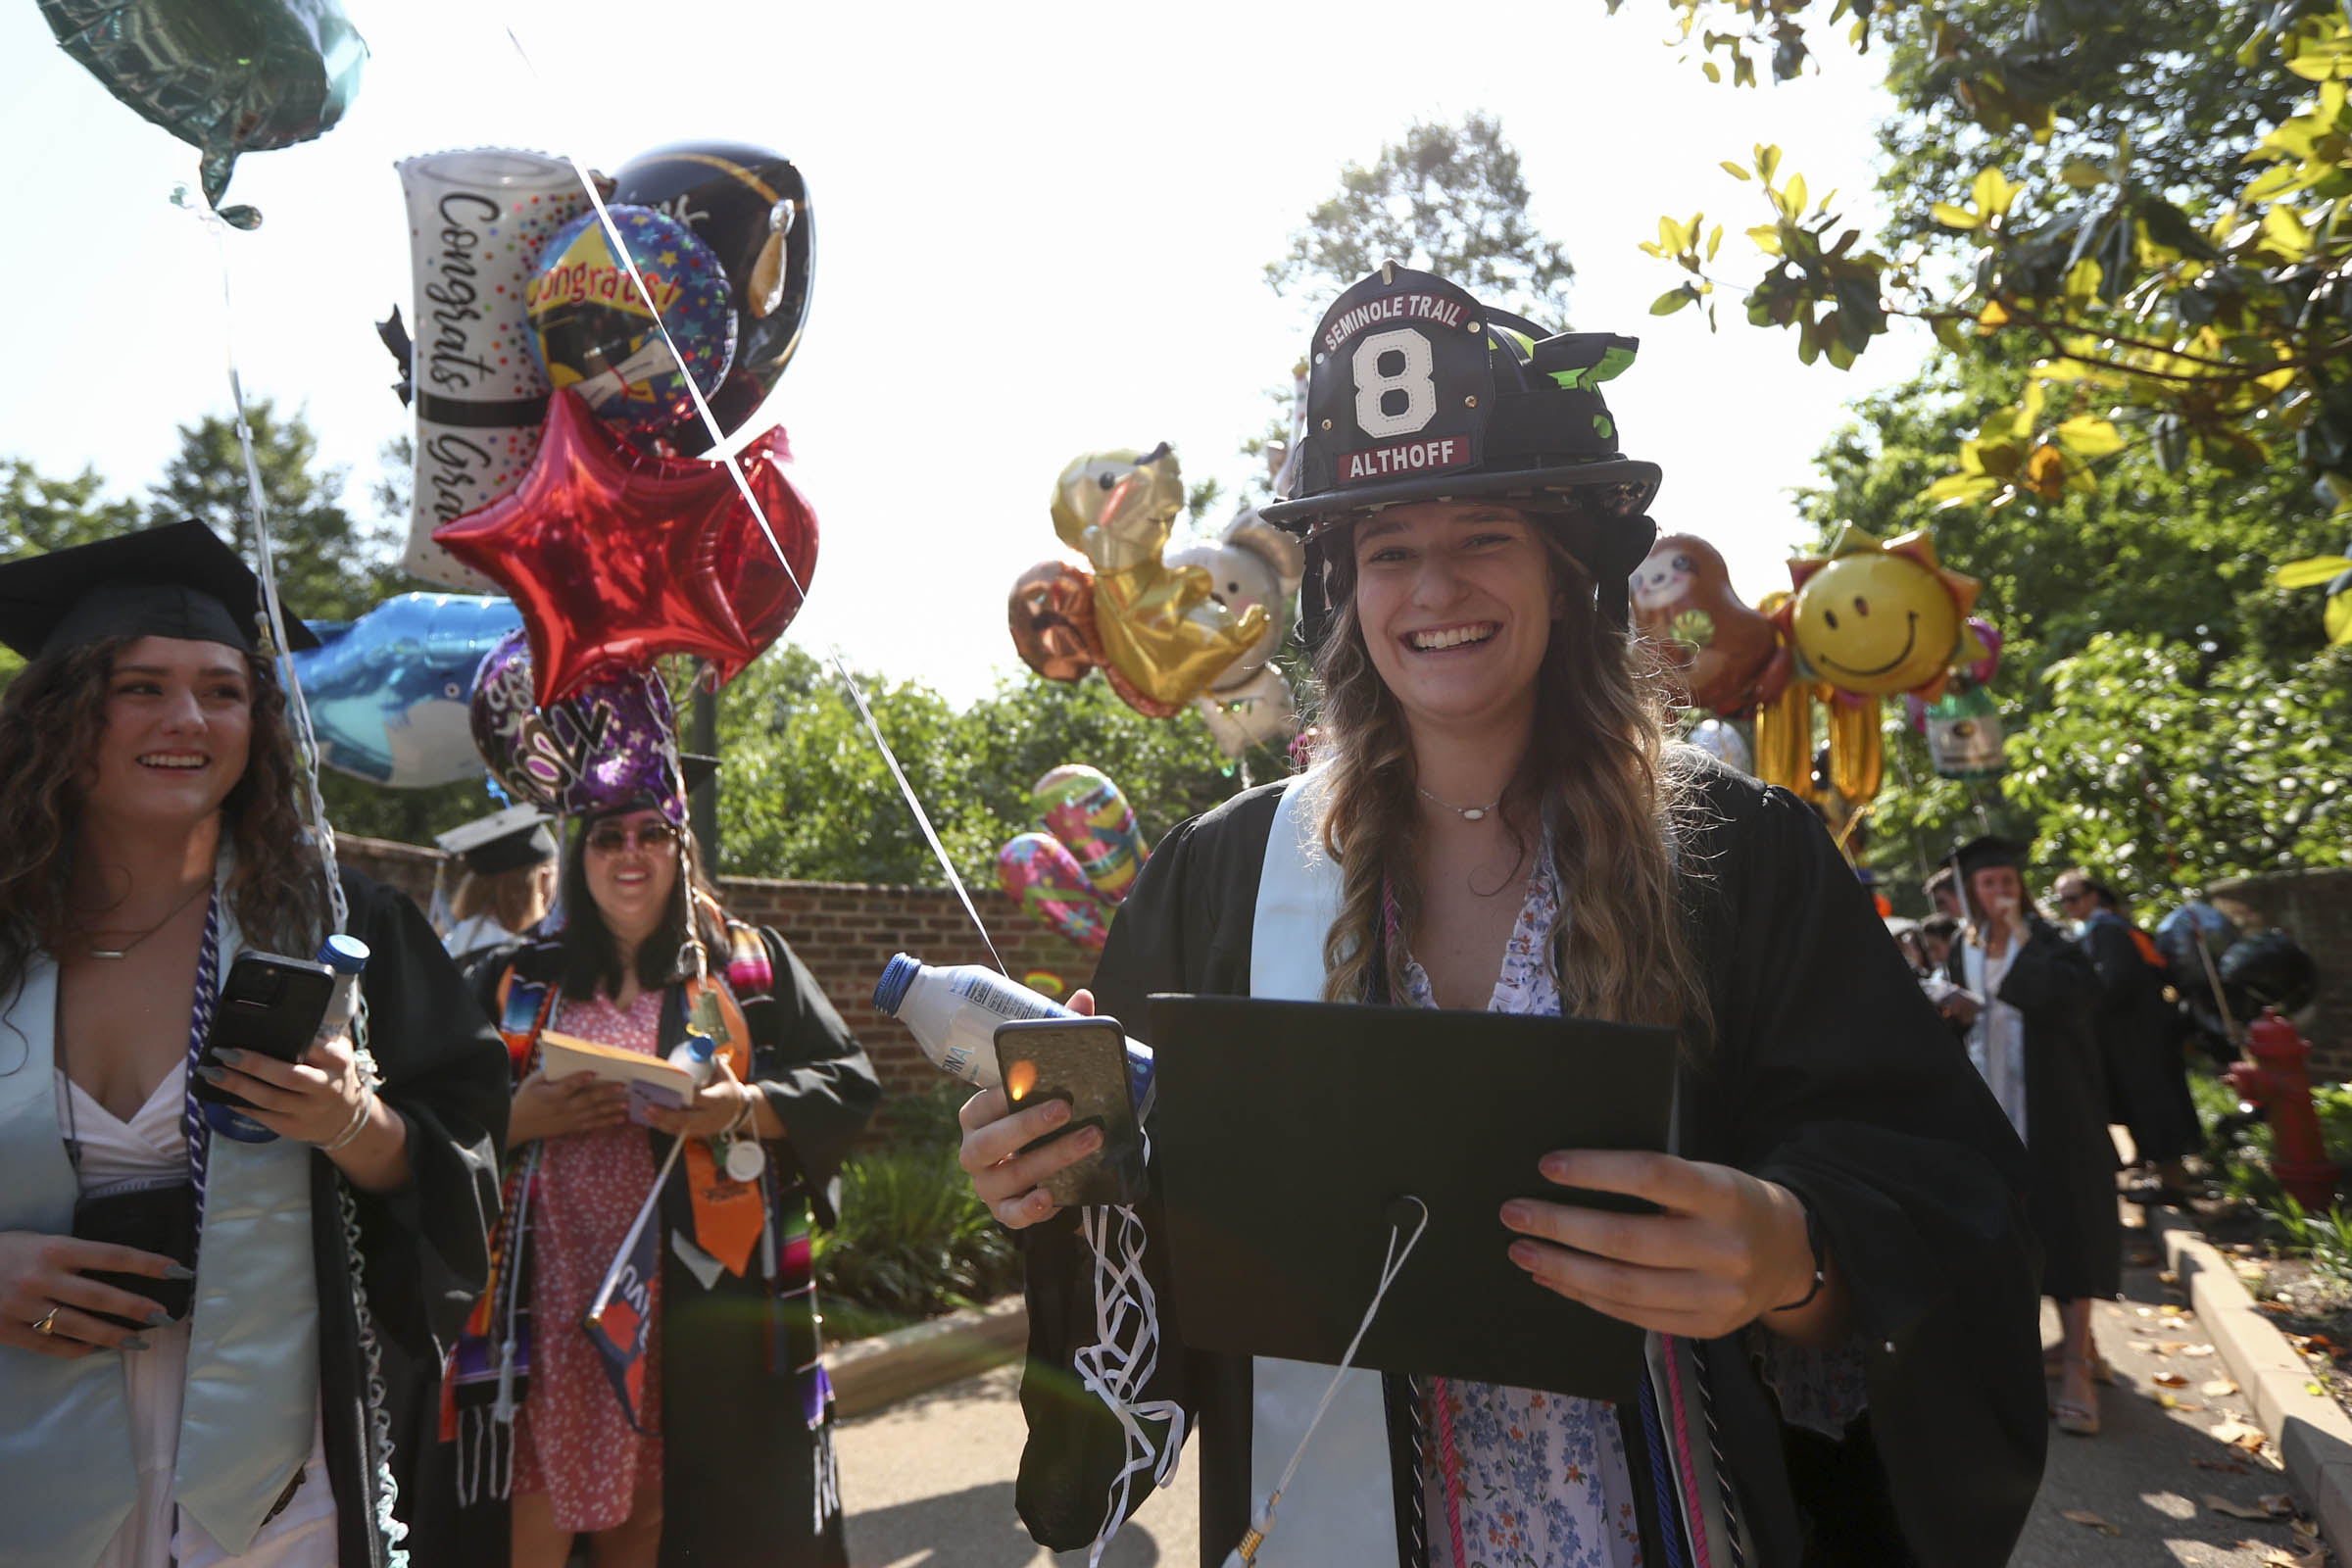 A smiling Jordan Althoff wears a firefighter helmet and holds her grad cap